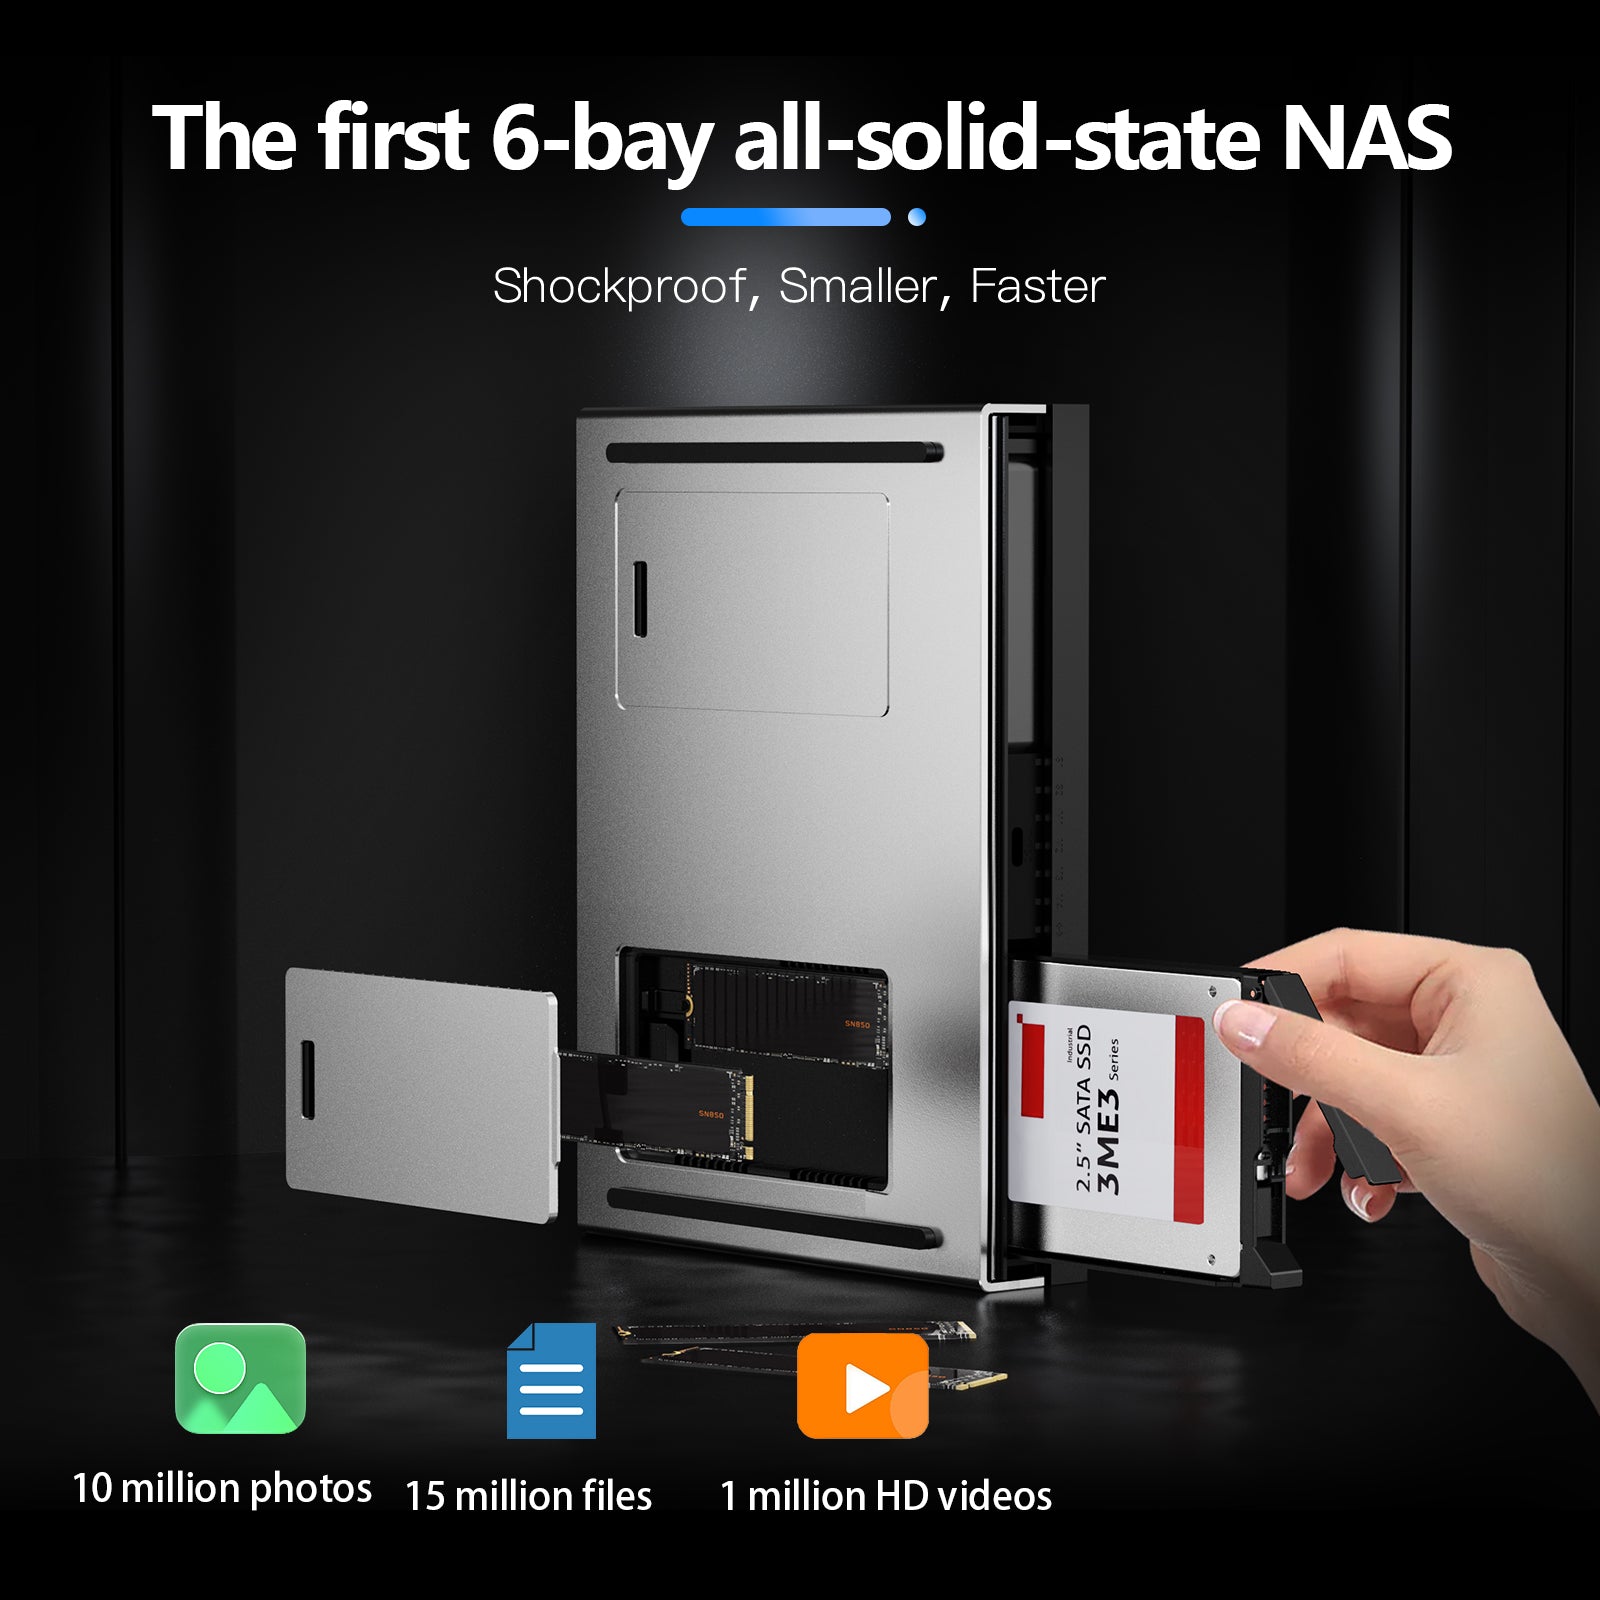 LincStation 【N1】 The world's first NAS with 6-bay all-solid-state drives